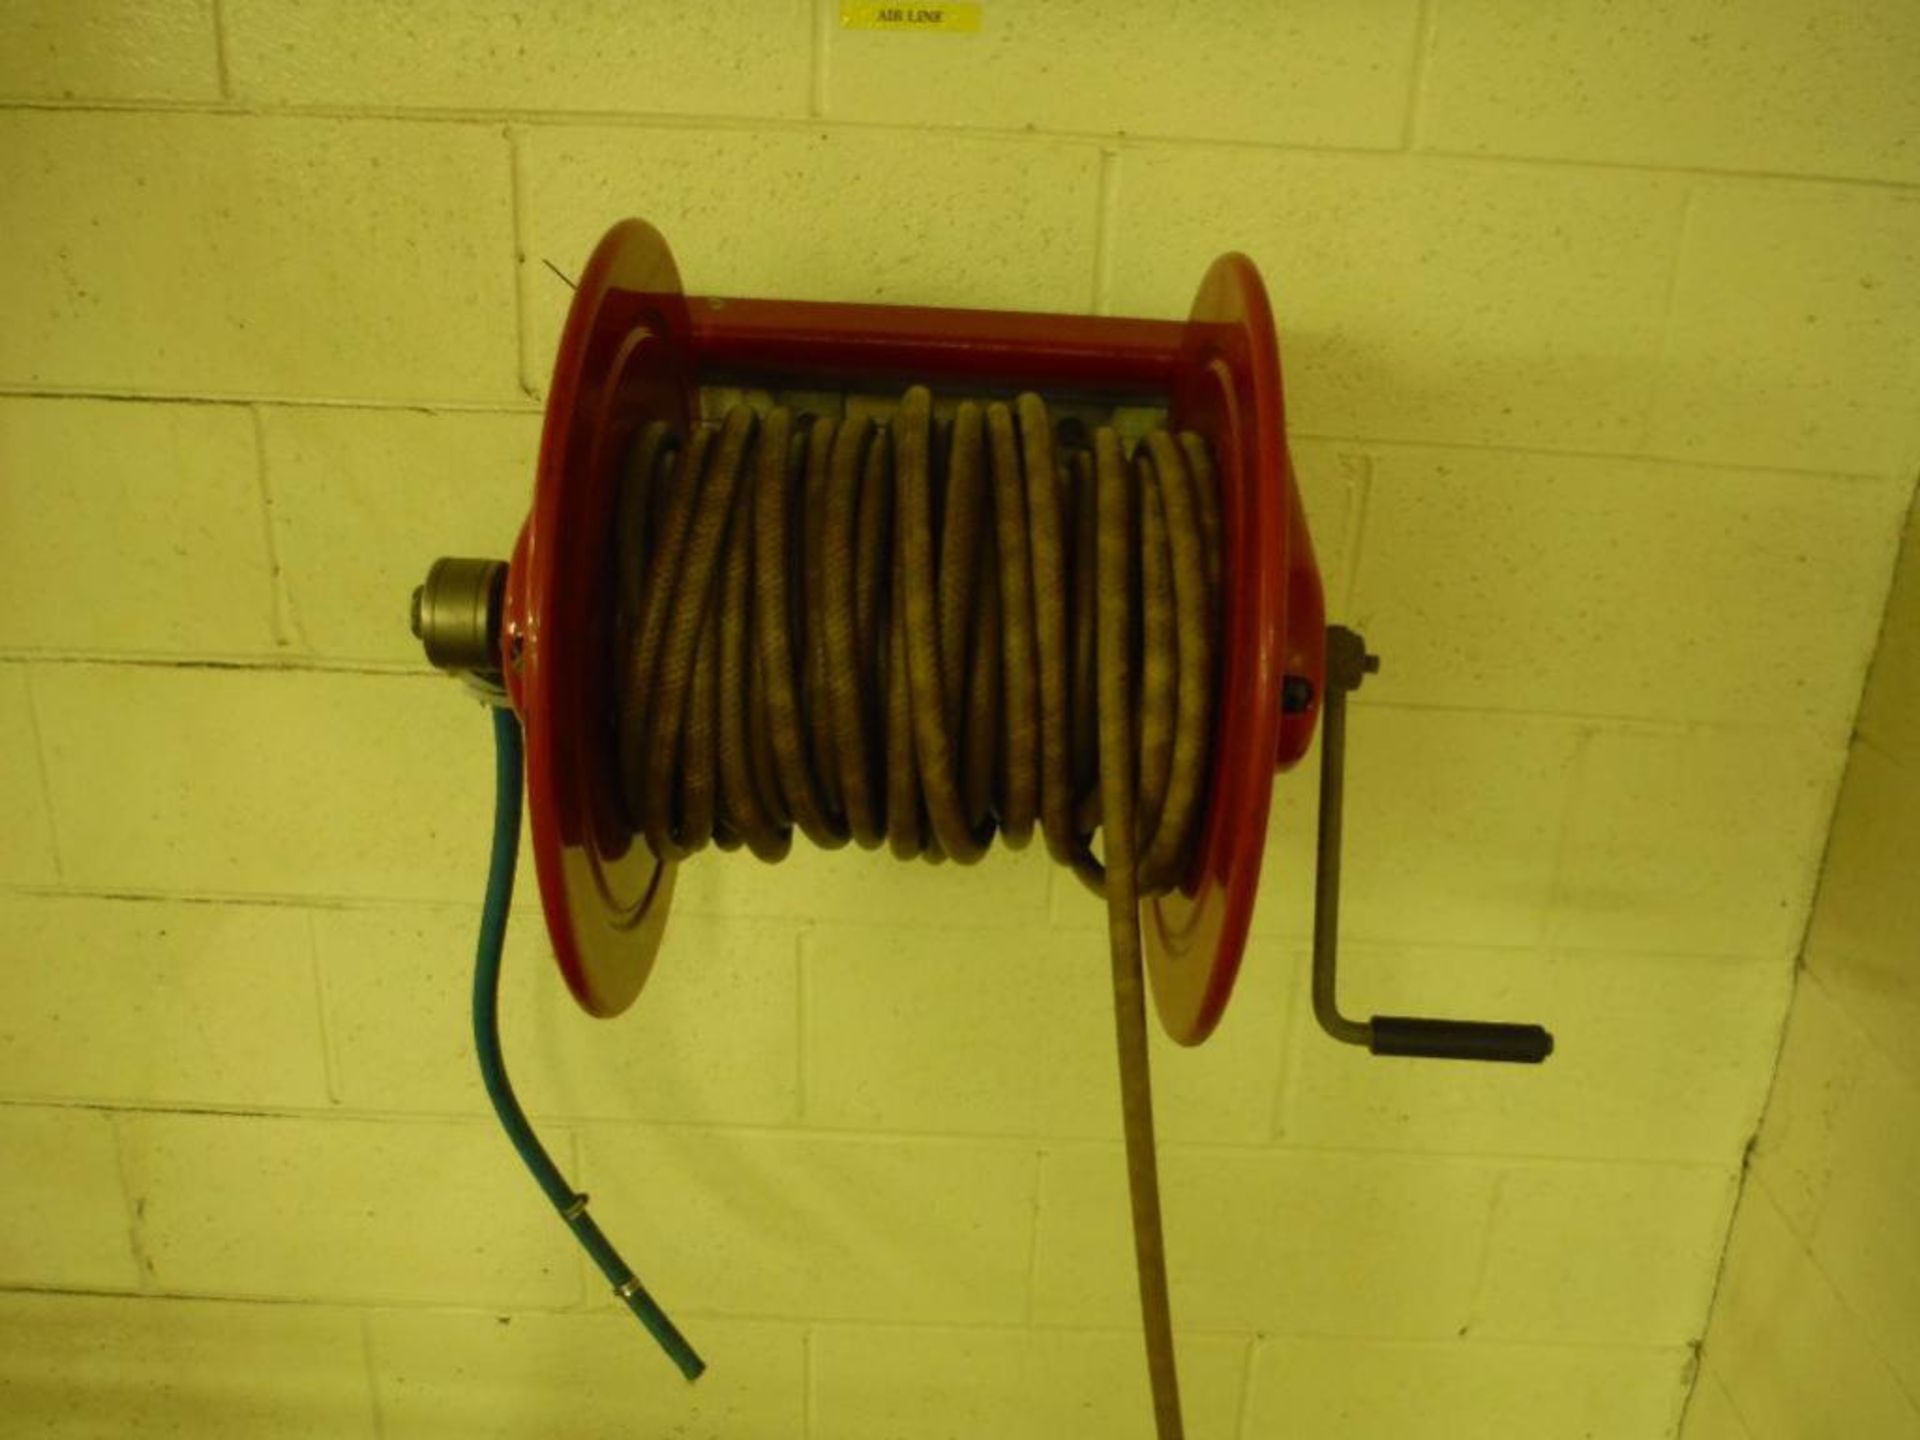 Reelcraft hand crank hose reel with hose (EACH) ** Rigging Fee: $15 ** - Image 6 of 6